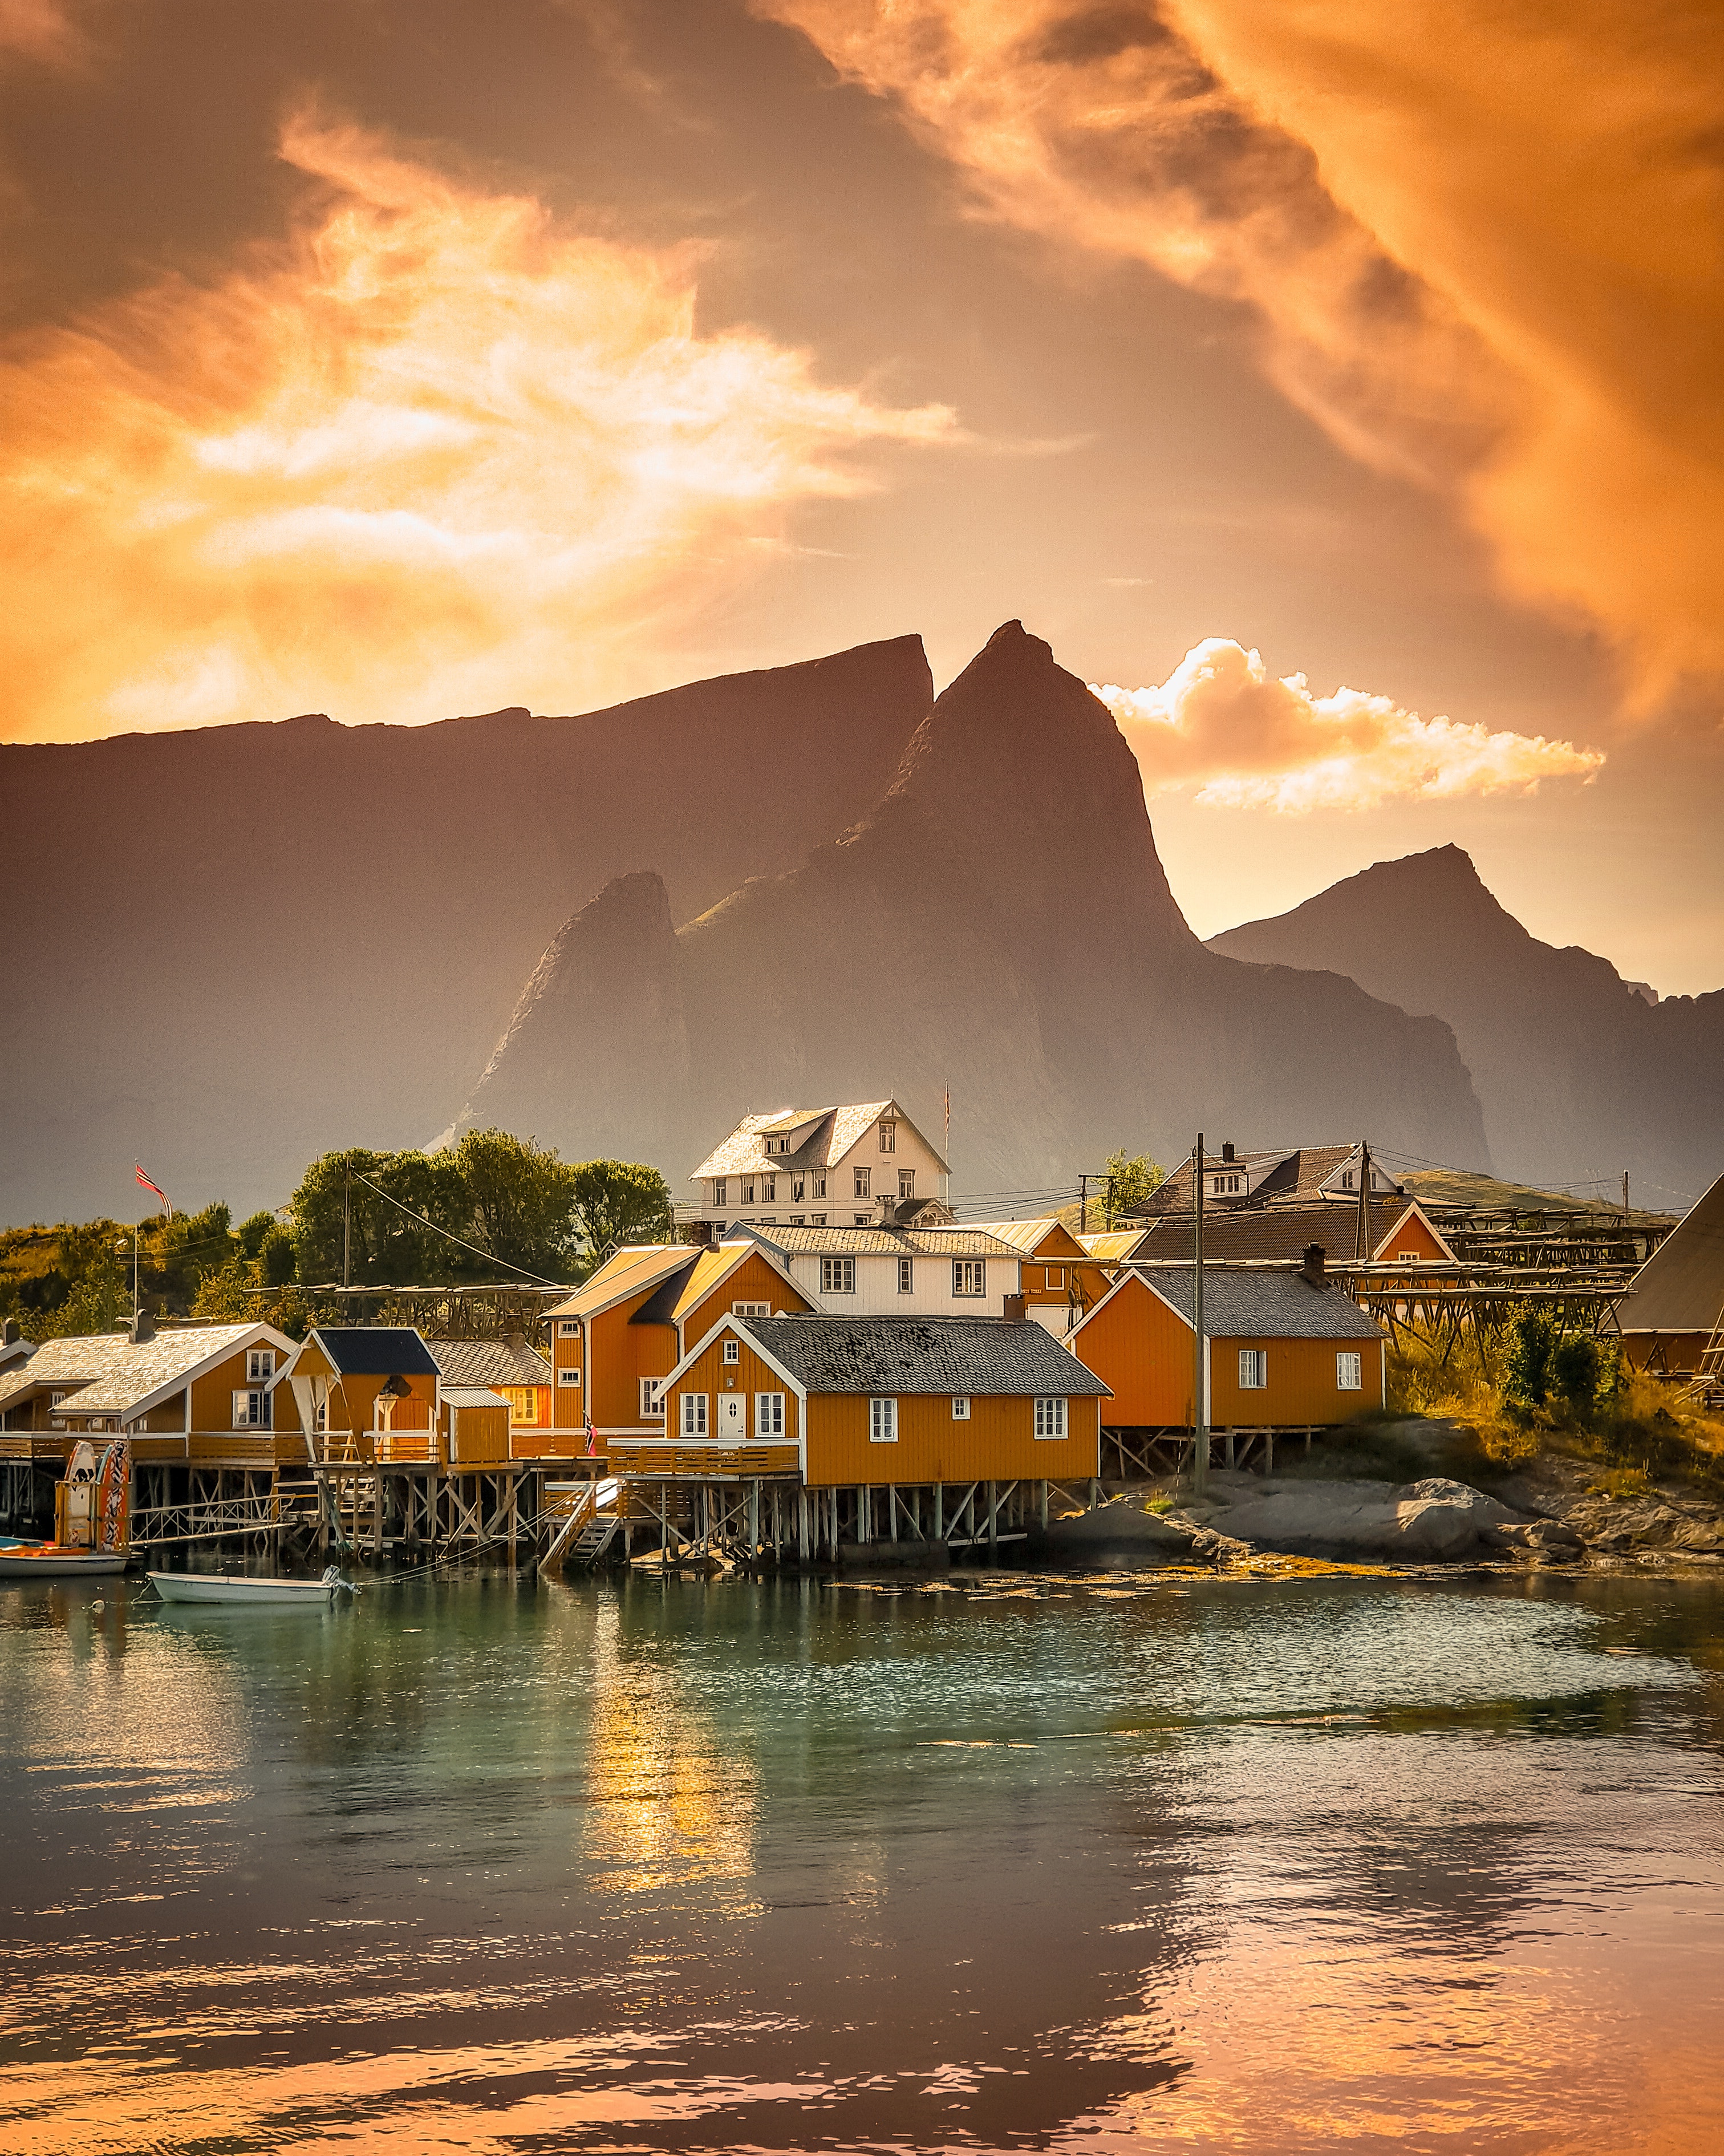 Norway photos download the best free norway stock photos hd images